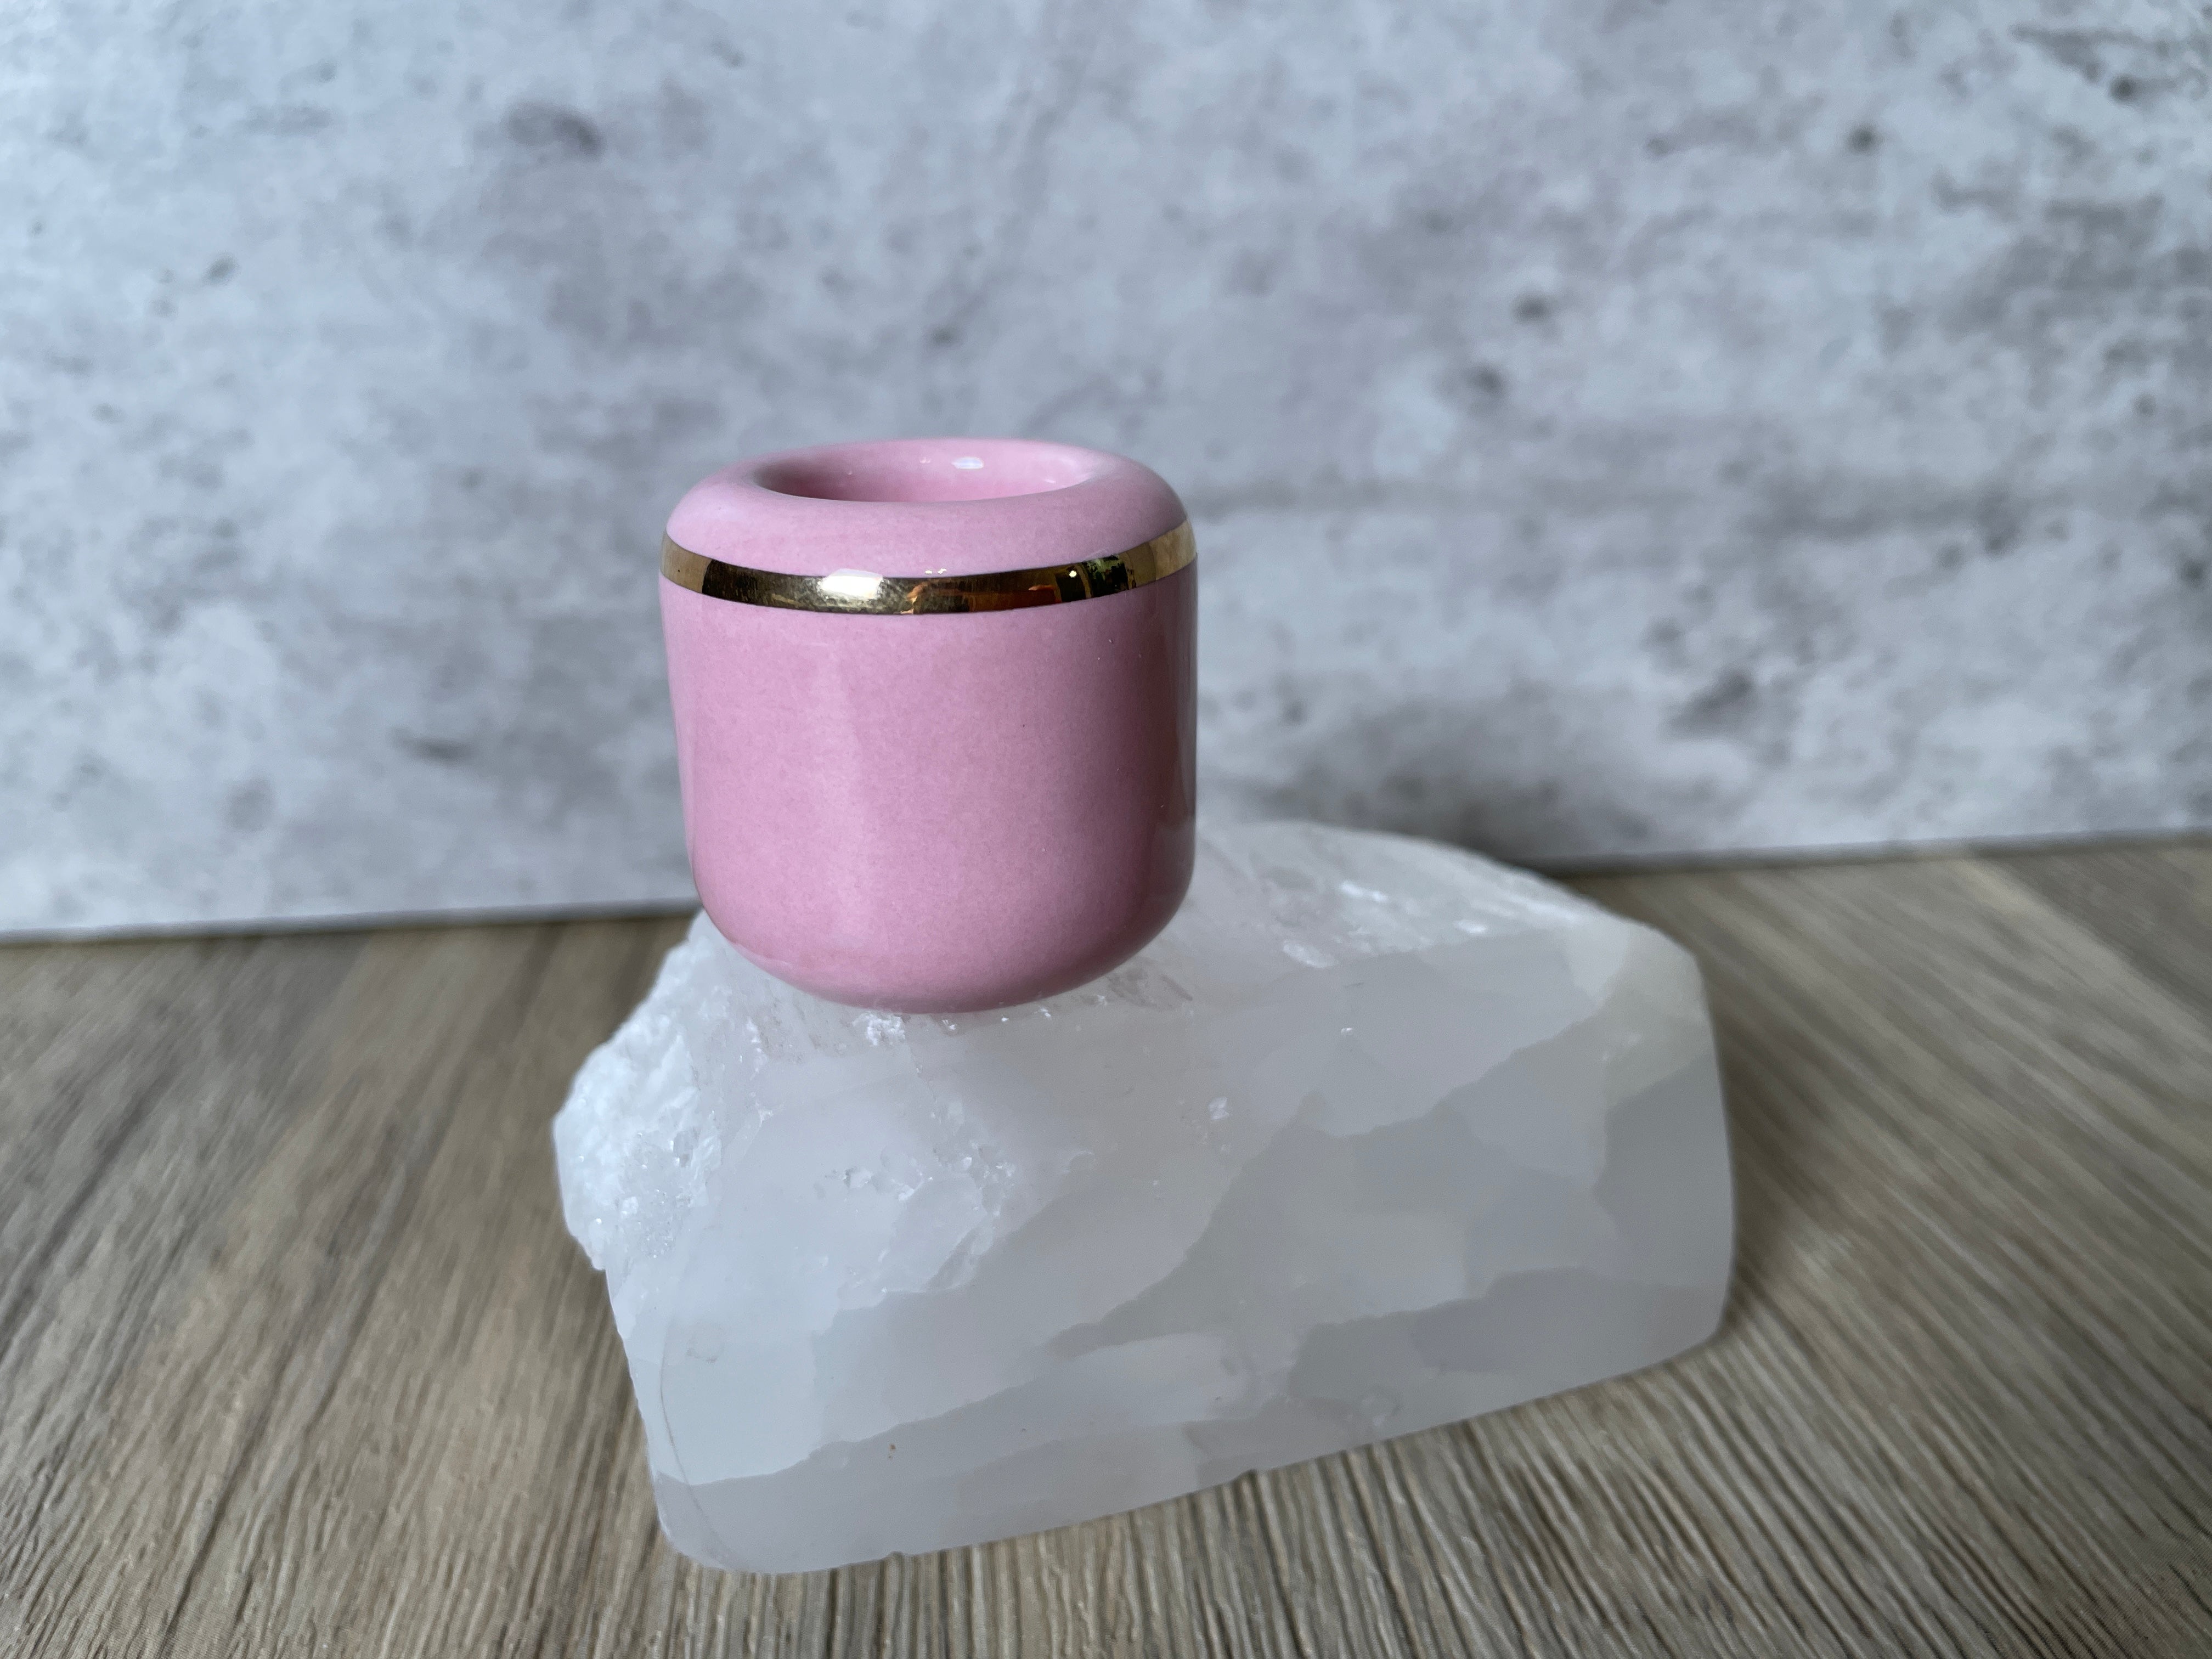 Buy Online Latest and Unique Pink Chime Candle Holder - Ceramic with Gold Band | Shop Best Spiritual Items - The Mystical Ritual